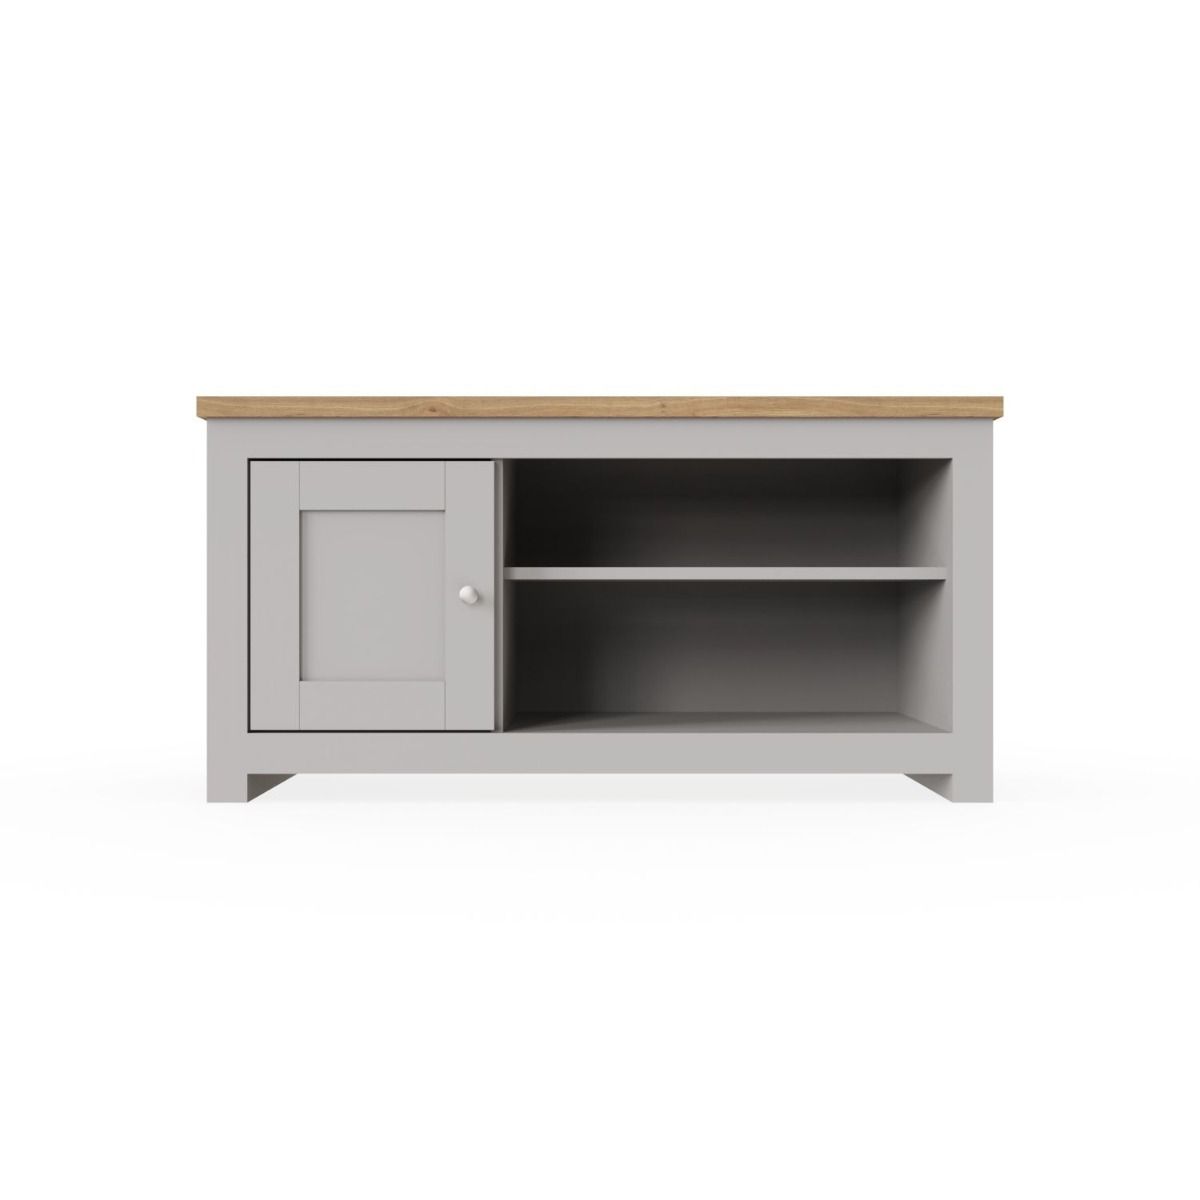 Lisbon TV Unit with 1 Door 2 Shelves allhomely